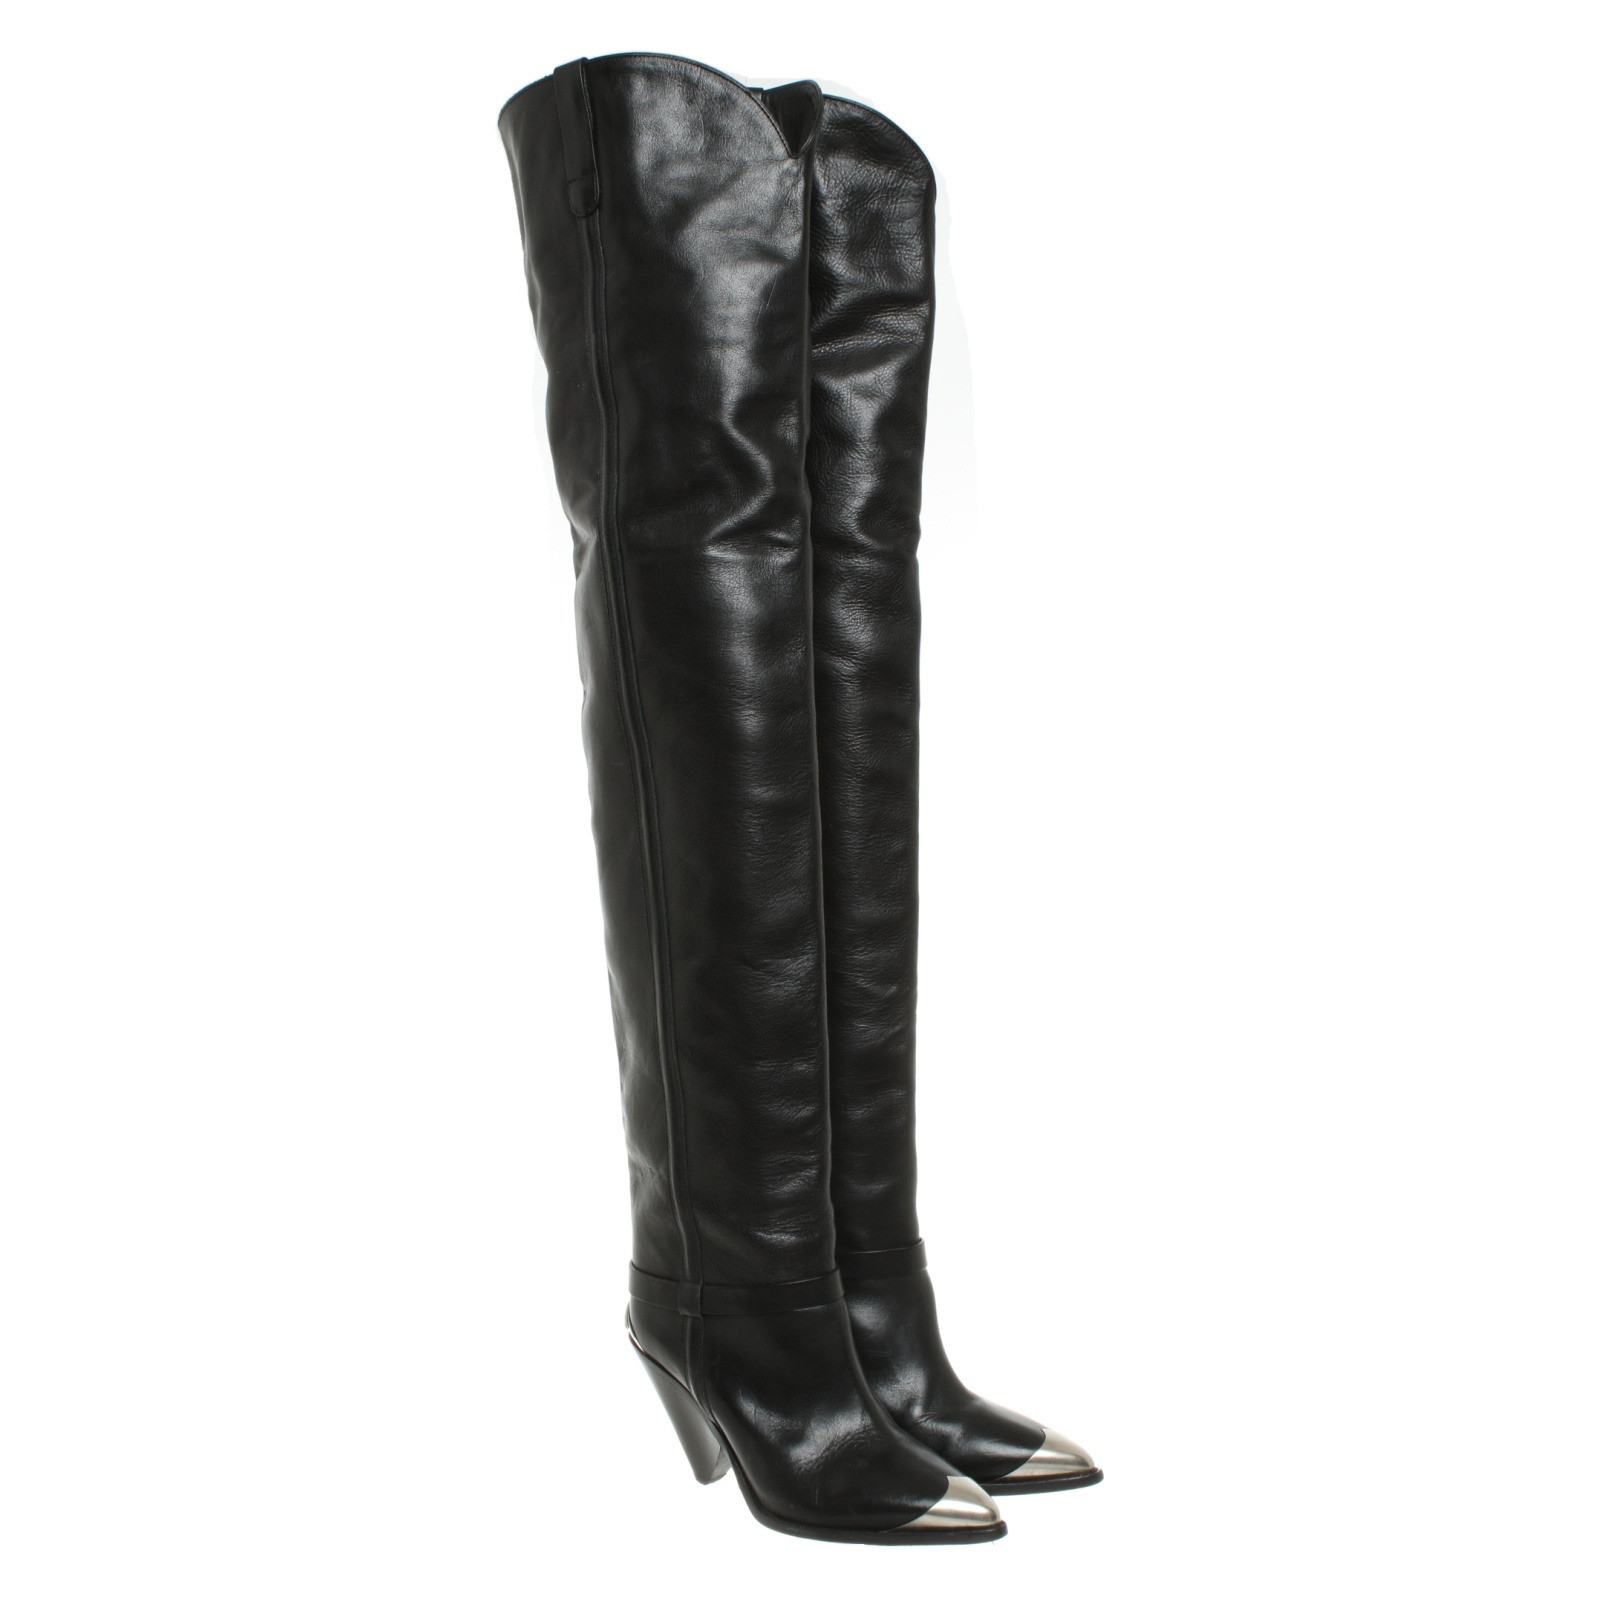 Isabel Marant Boots Leather In Black Second Hand Isabel Marant Boots Leather In Black Buy Used For 9